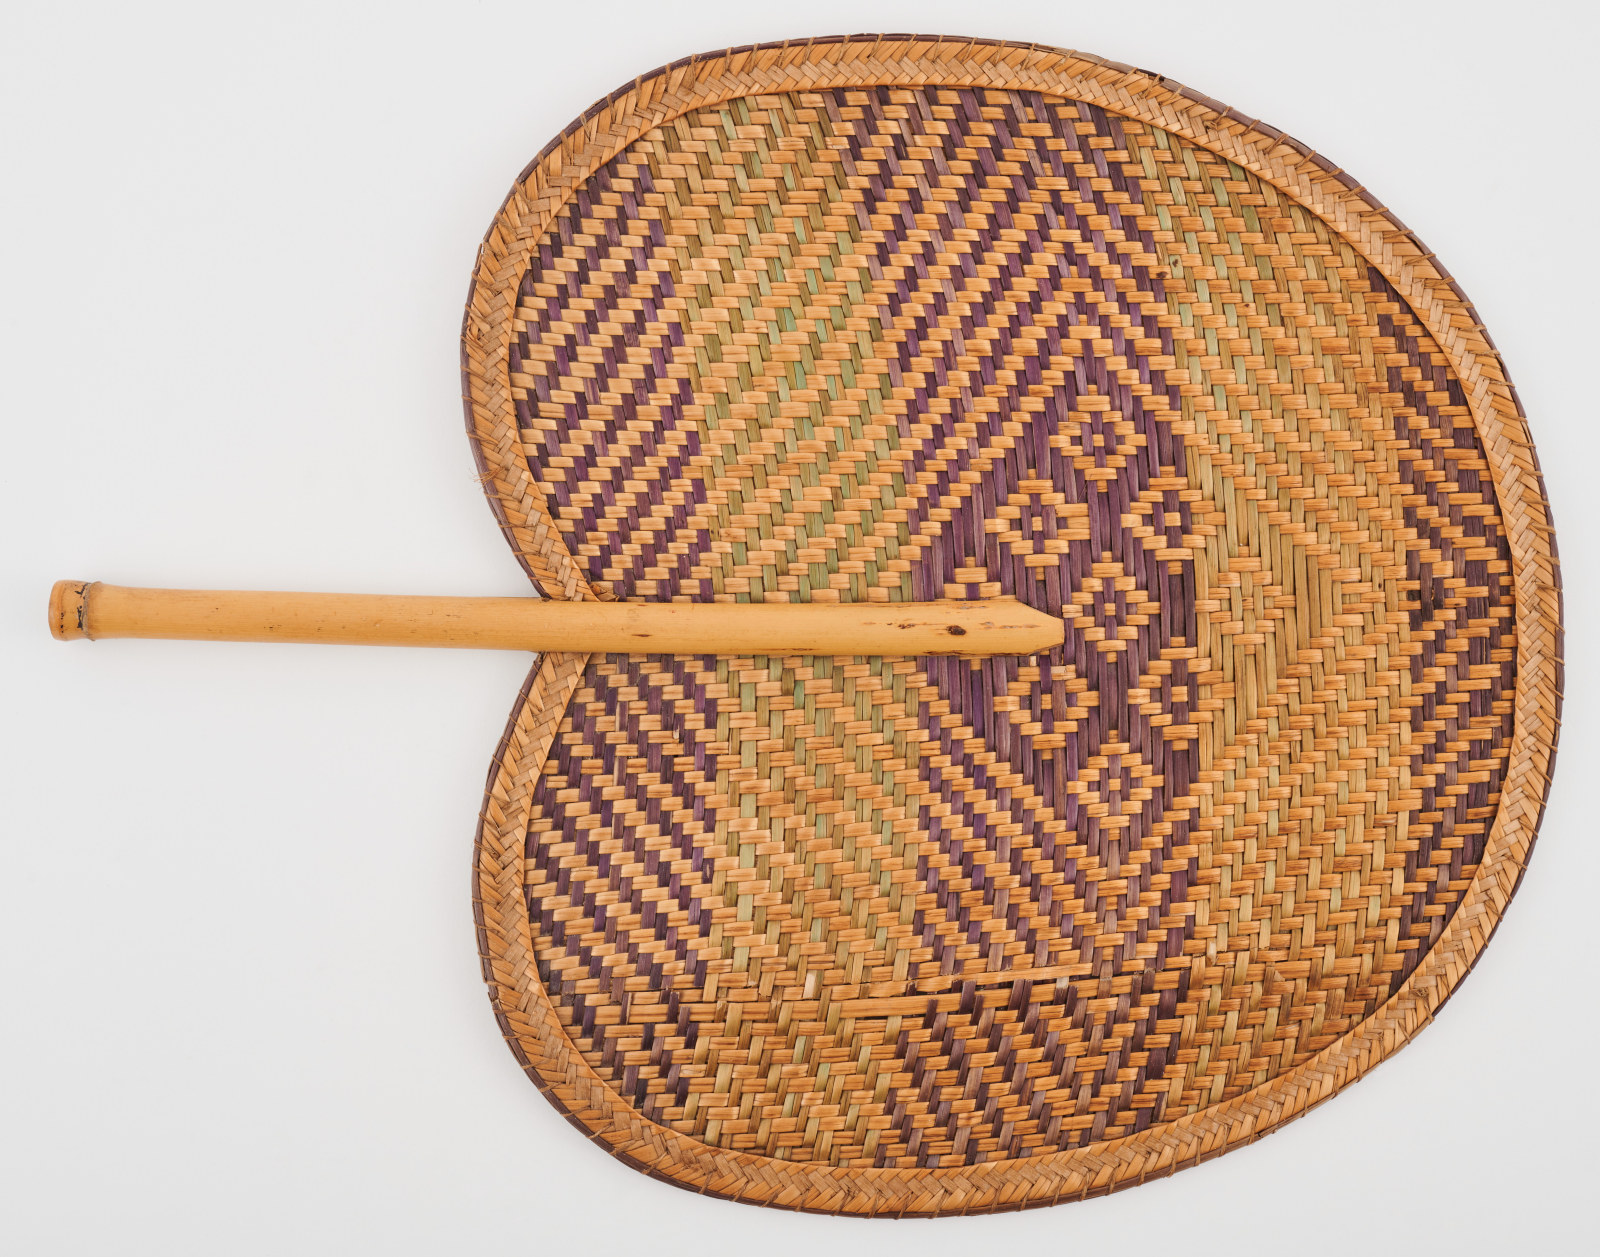 Woven handheld fan owned by Esther Moran, a resident of No 60 Gloucester Street, maker unknown, date unknown, palm leaf and bamboo